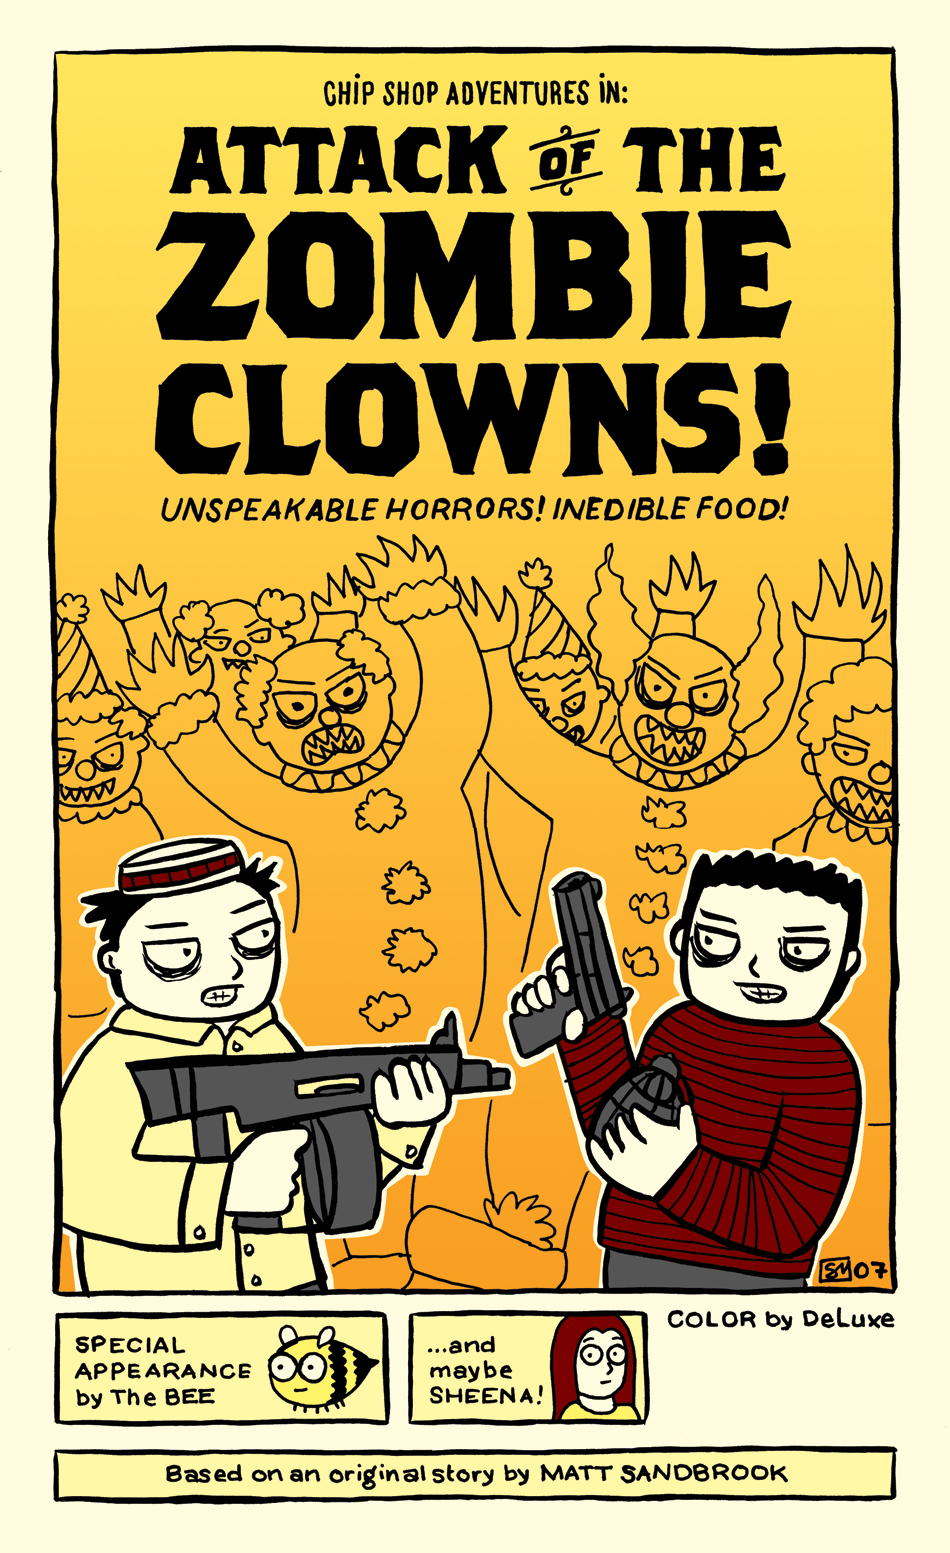 Chip Shop Adventures - Guest Comic #1 - Shayna Marchese: Clown Poster.